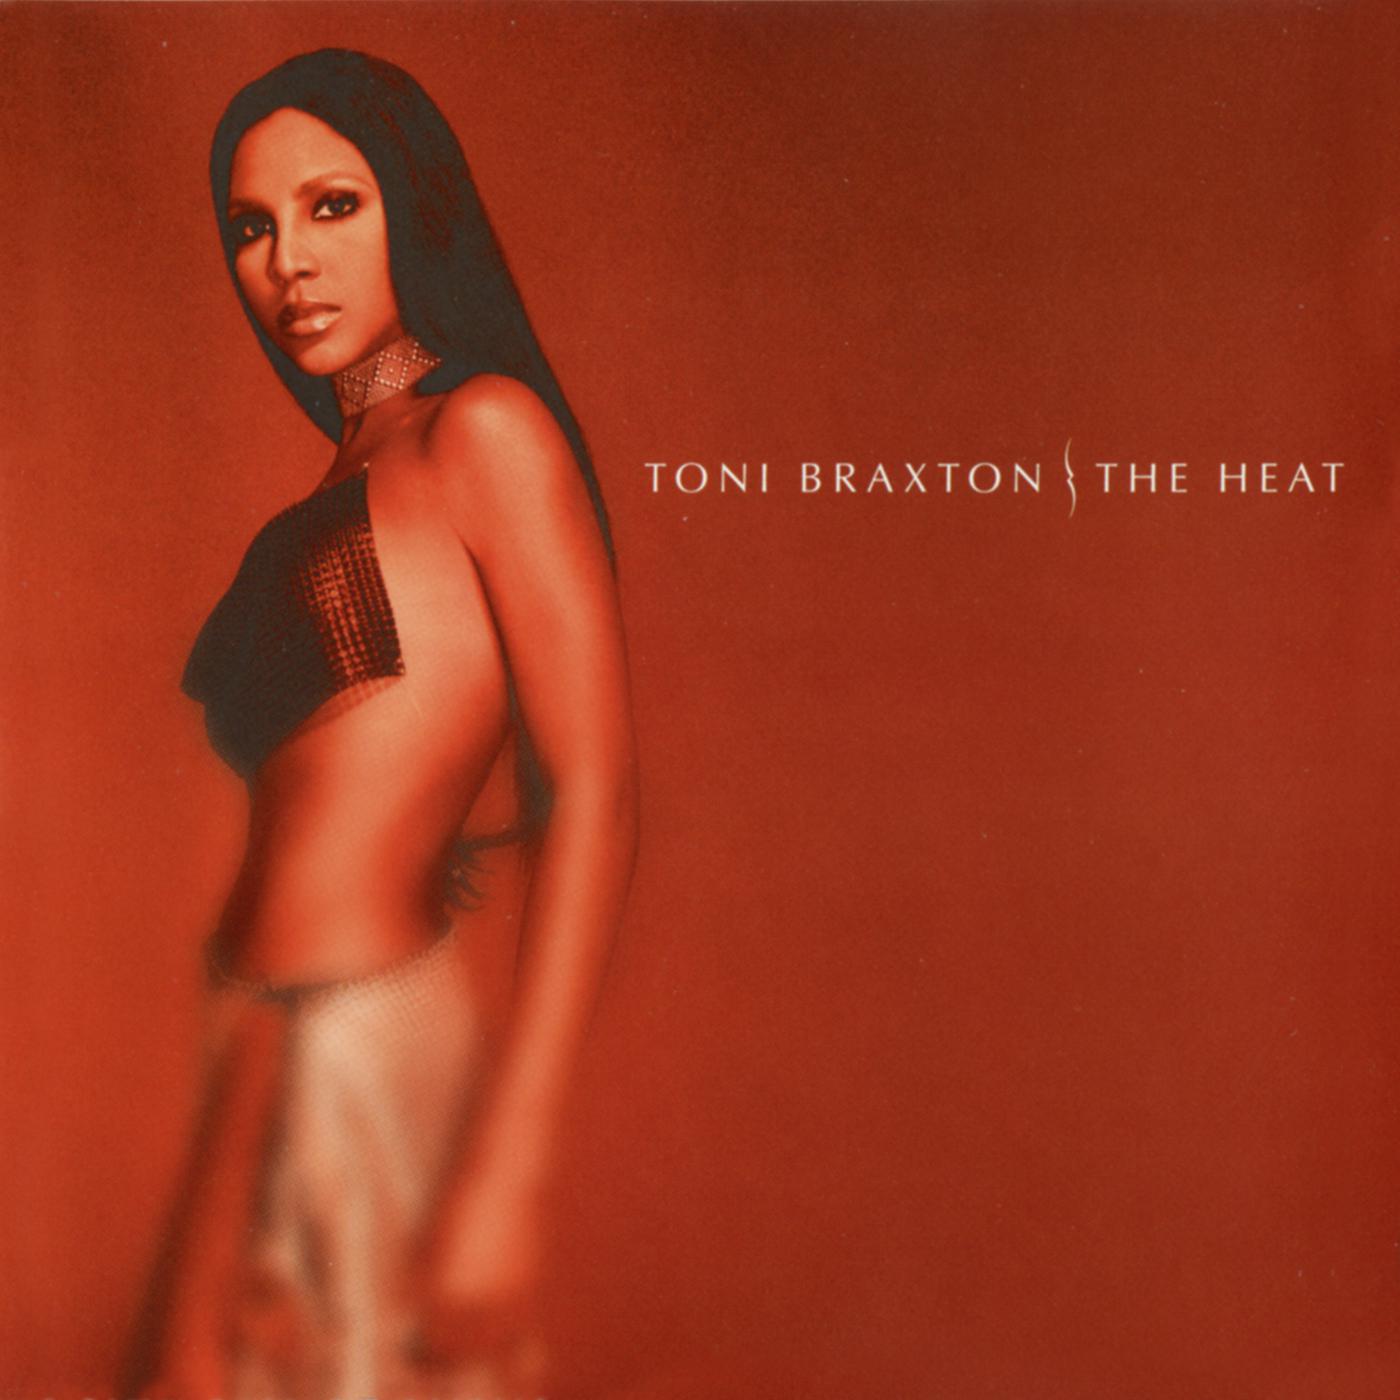 Speaking In Tongues歌词 歌手Toni Braxton-专辑The Heat-单曲《Speaking In Tongues》LRC歌词下载